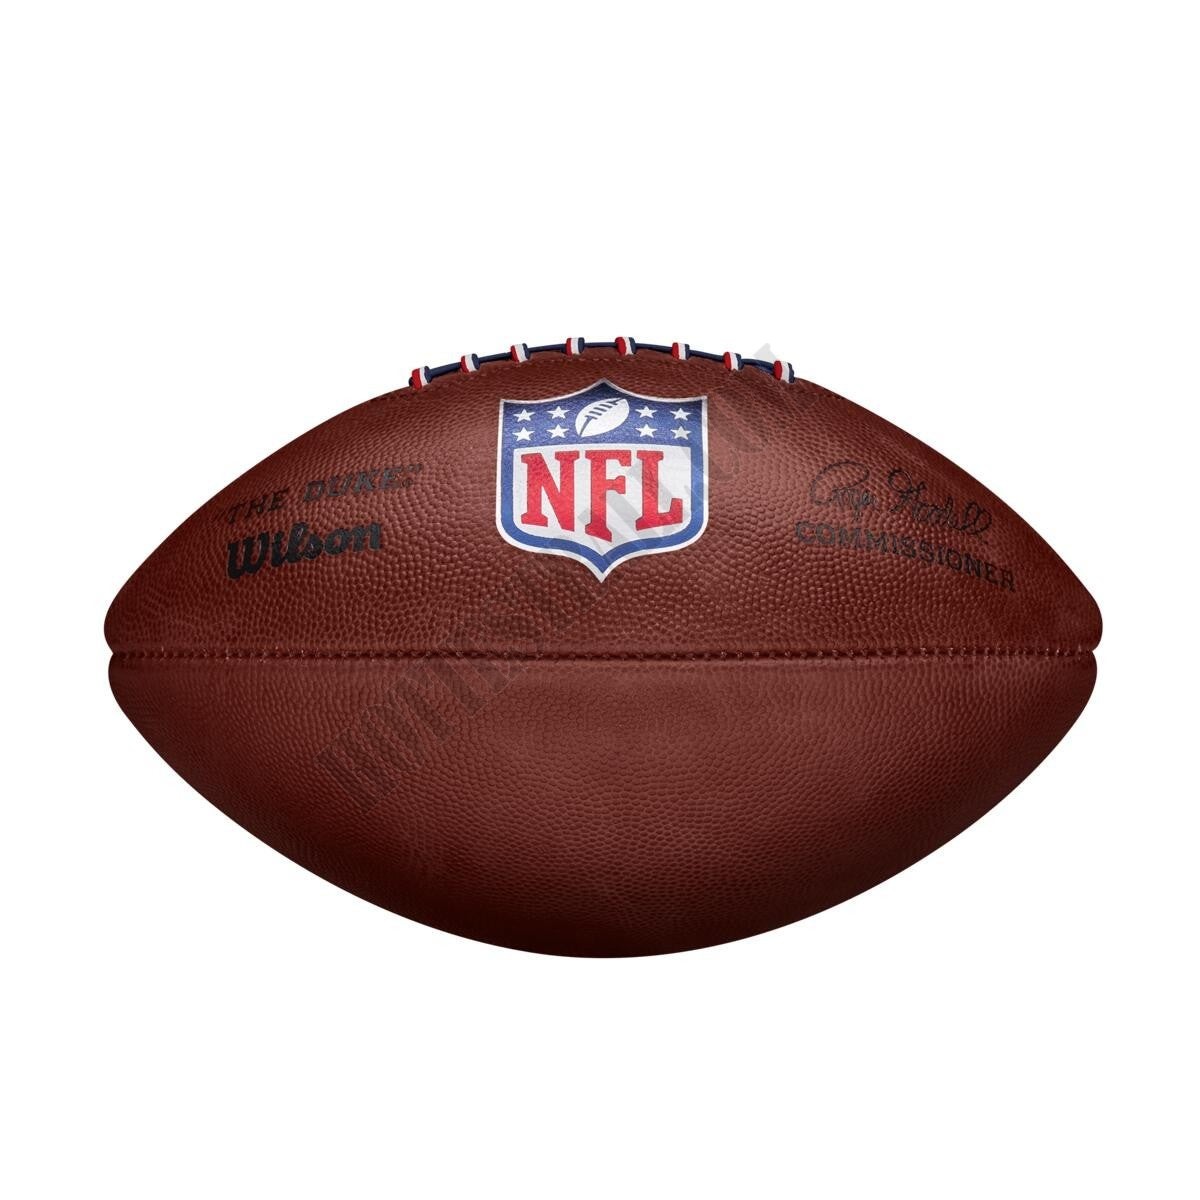 The Duke NFL Football Limited Edition - Wilson Discount Store - -5